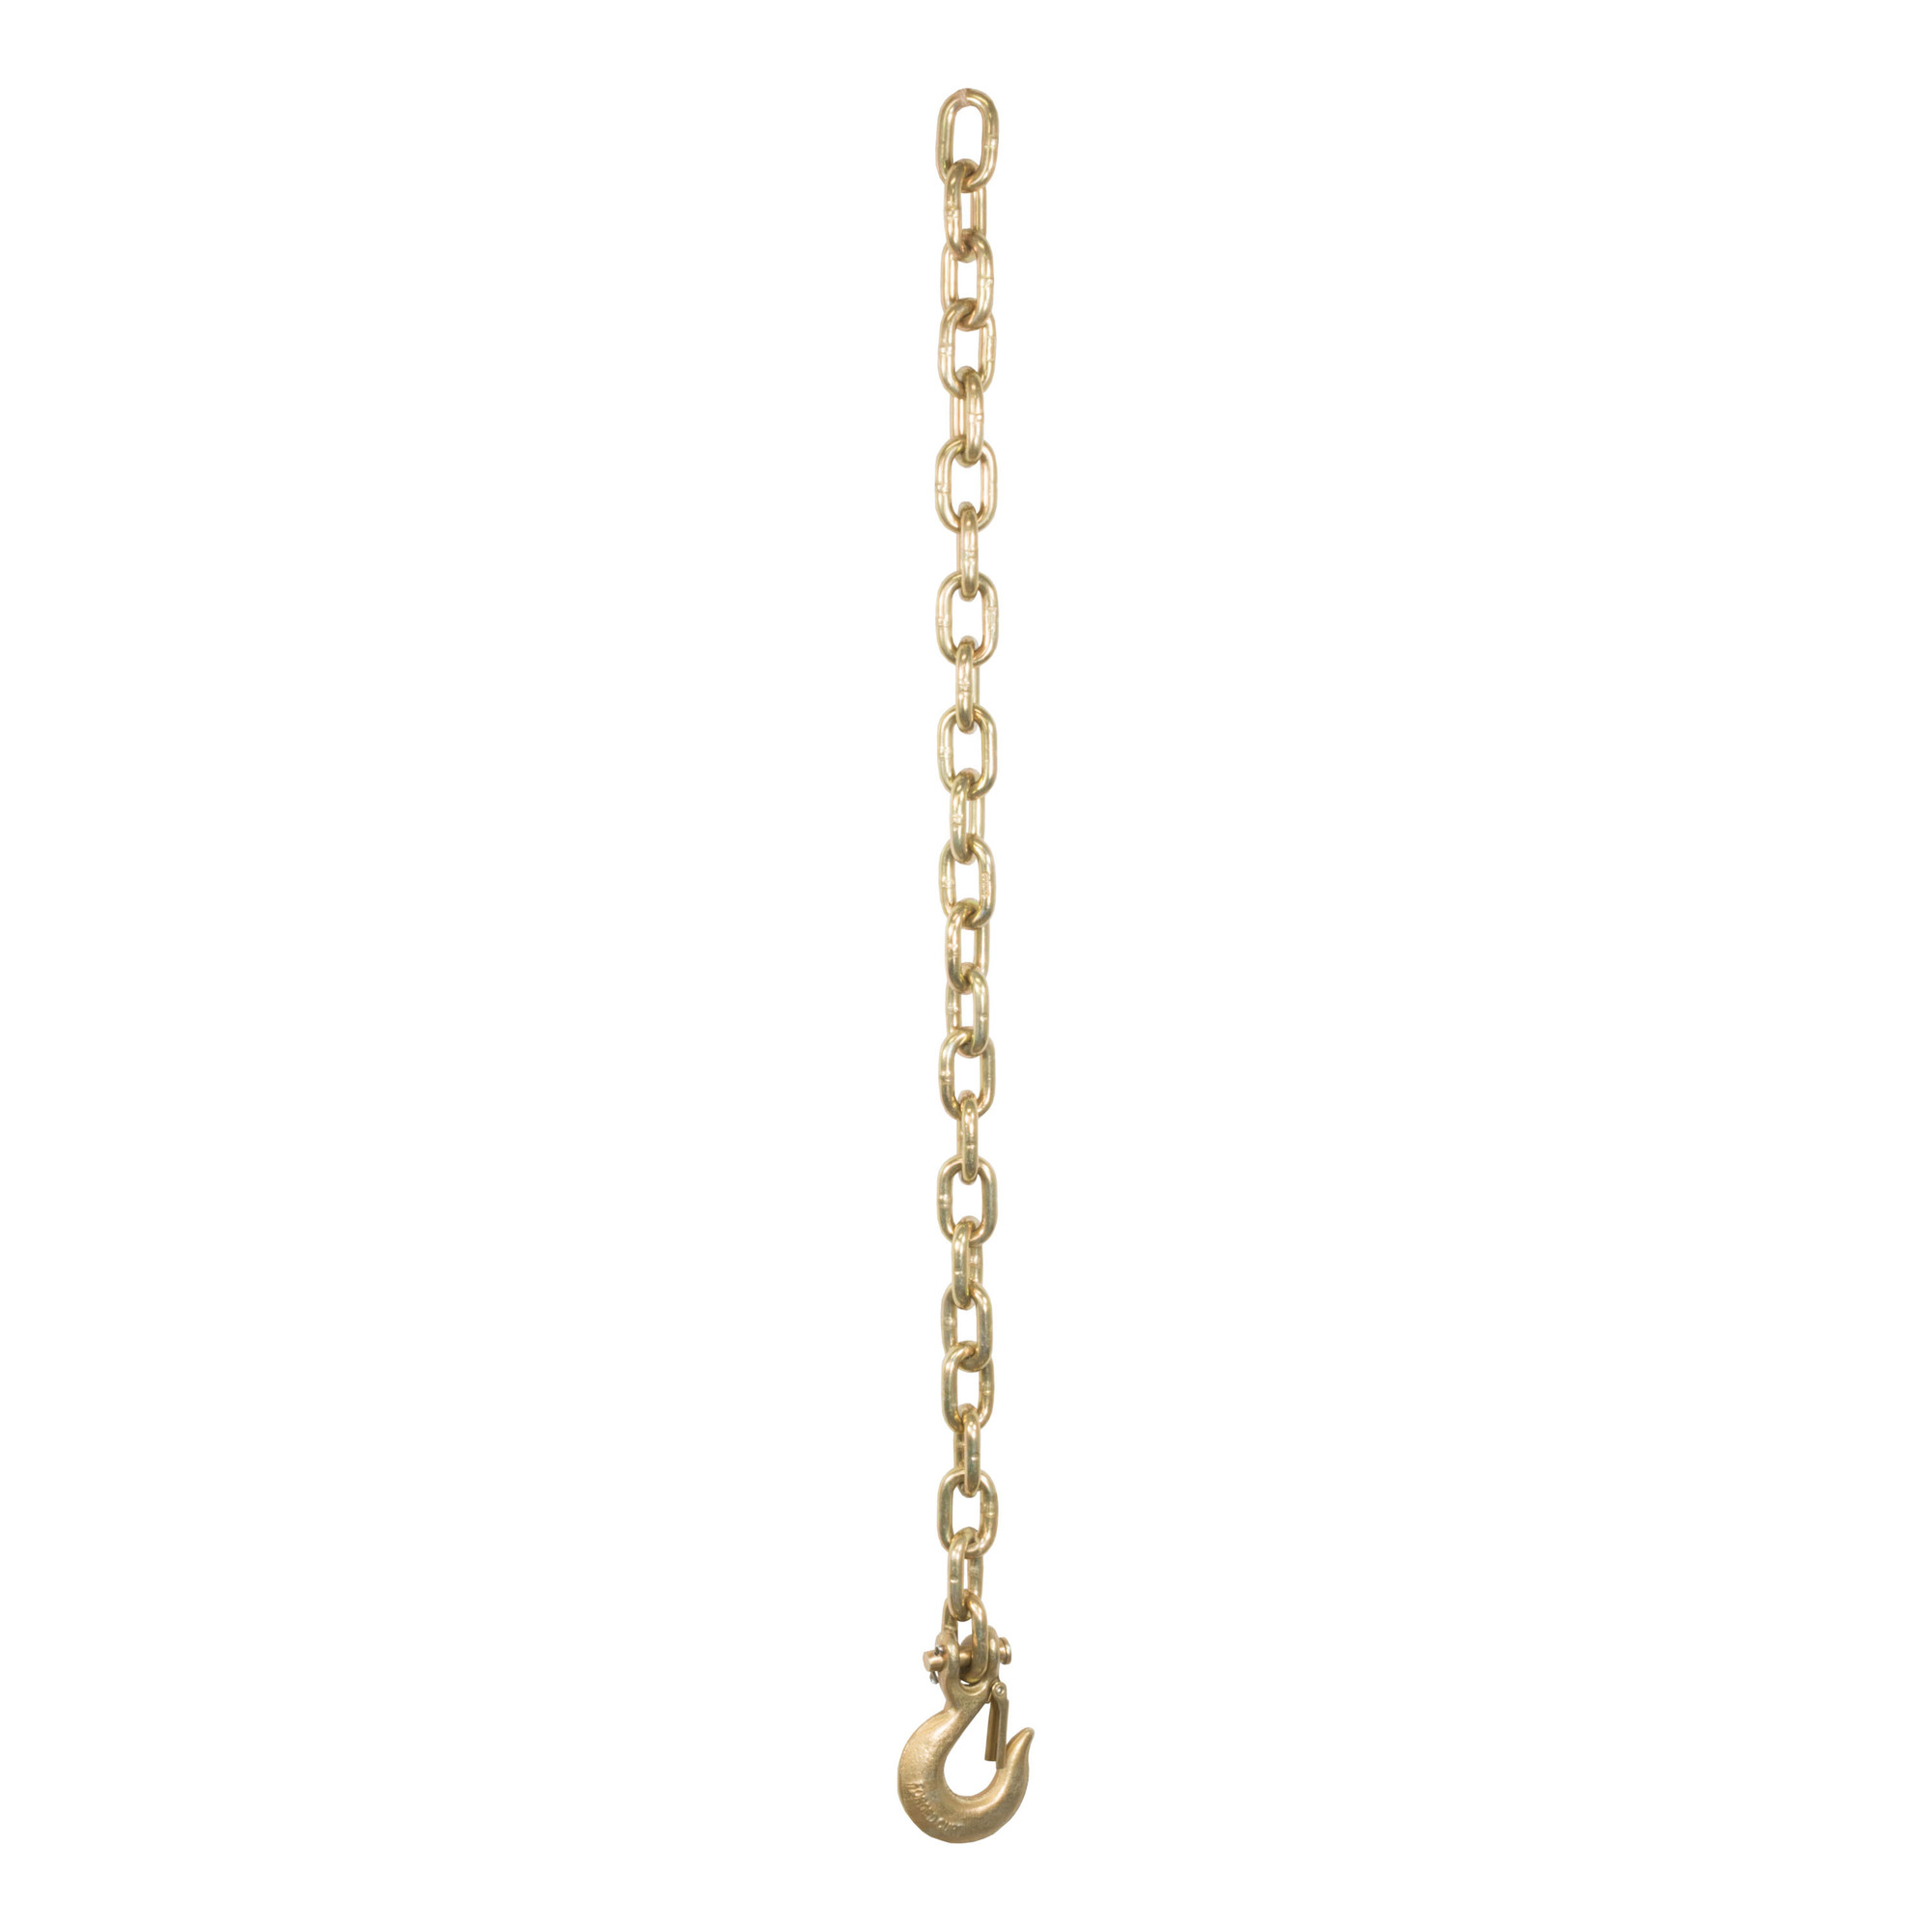 Curt Manufacturing, 35Inch Safety Chain with 1 Clevis Hook, Length 27 in, Material Steel, Model 80304